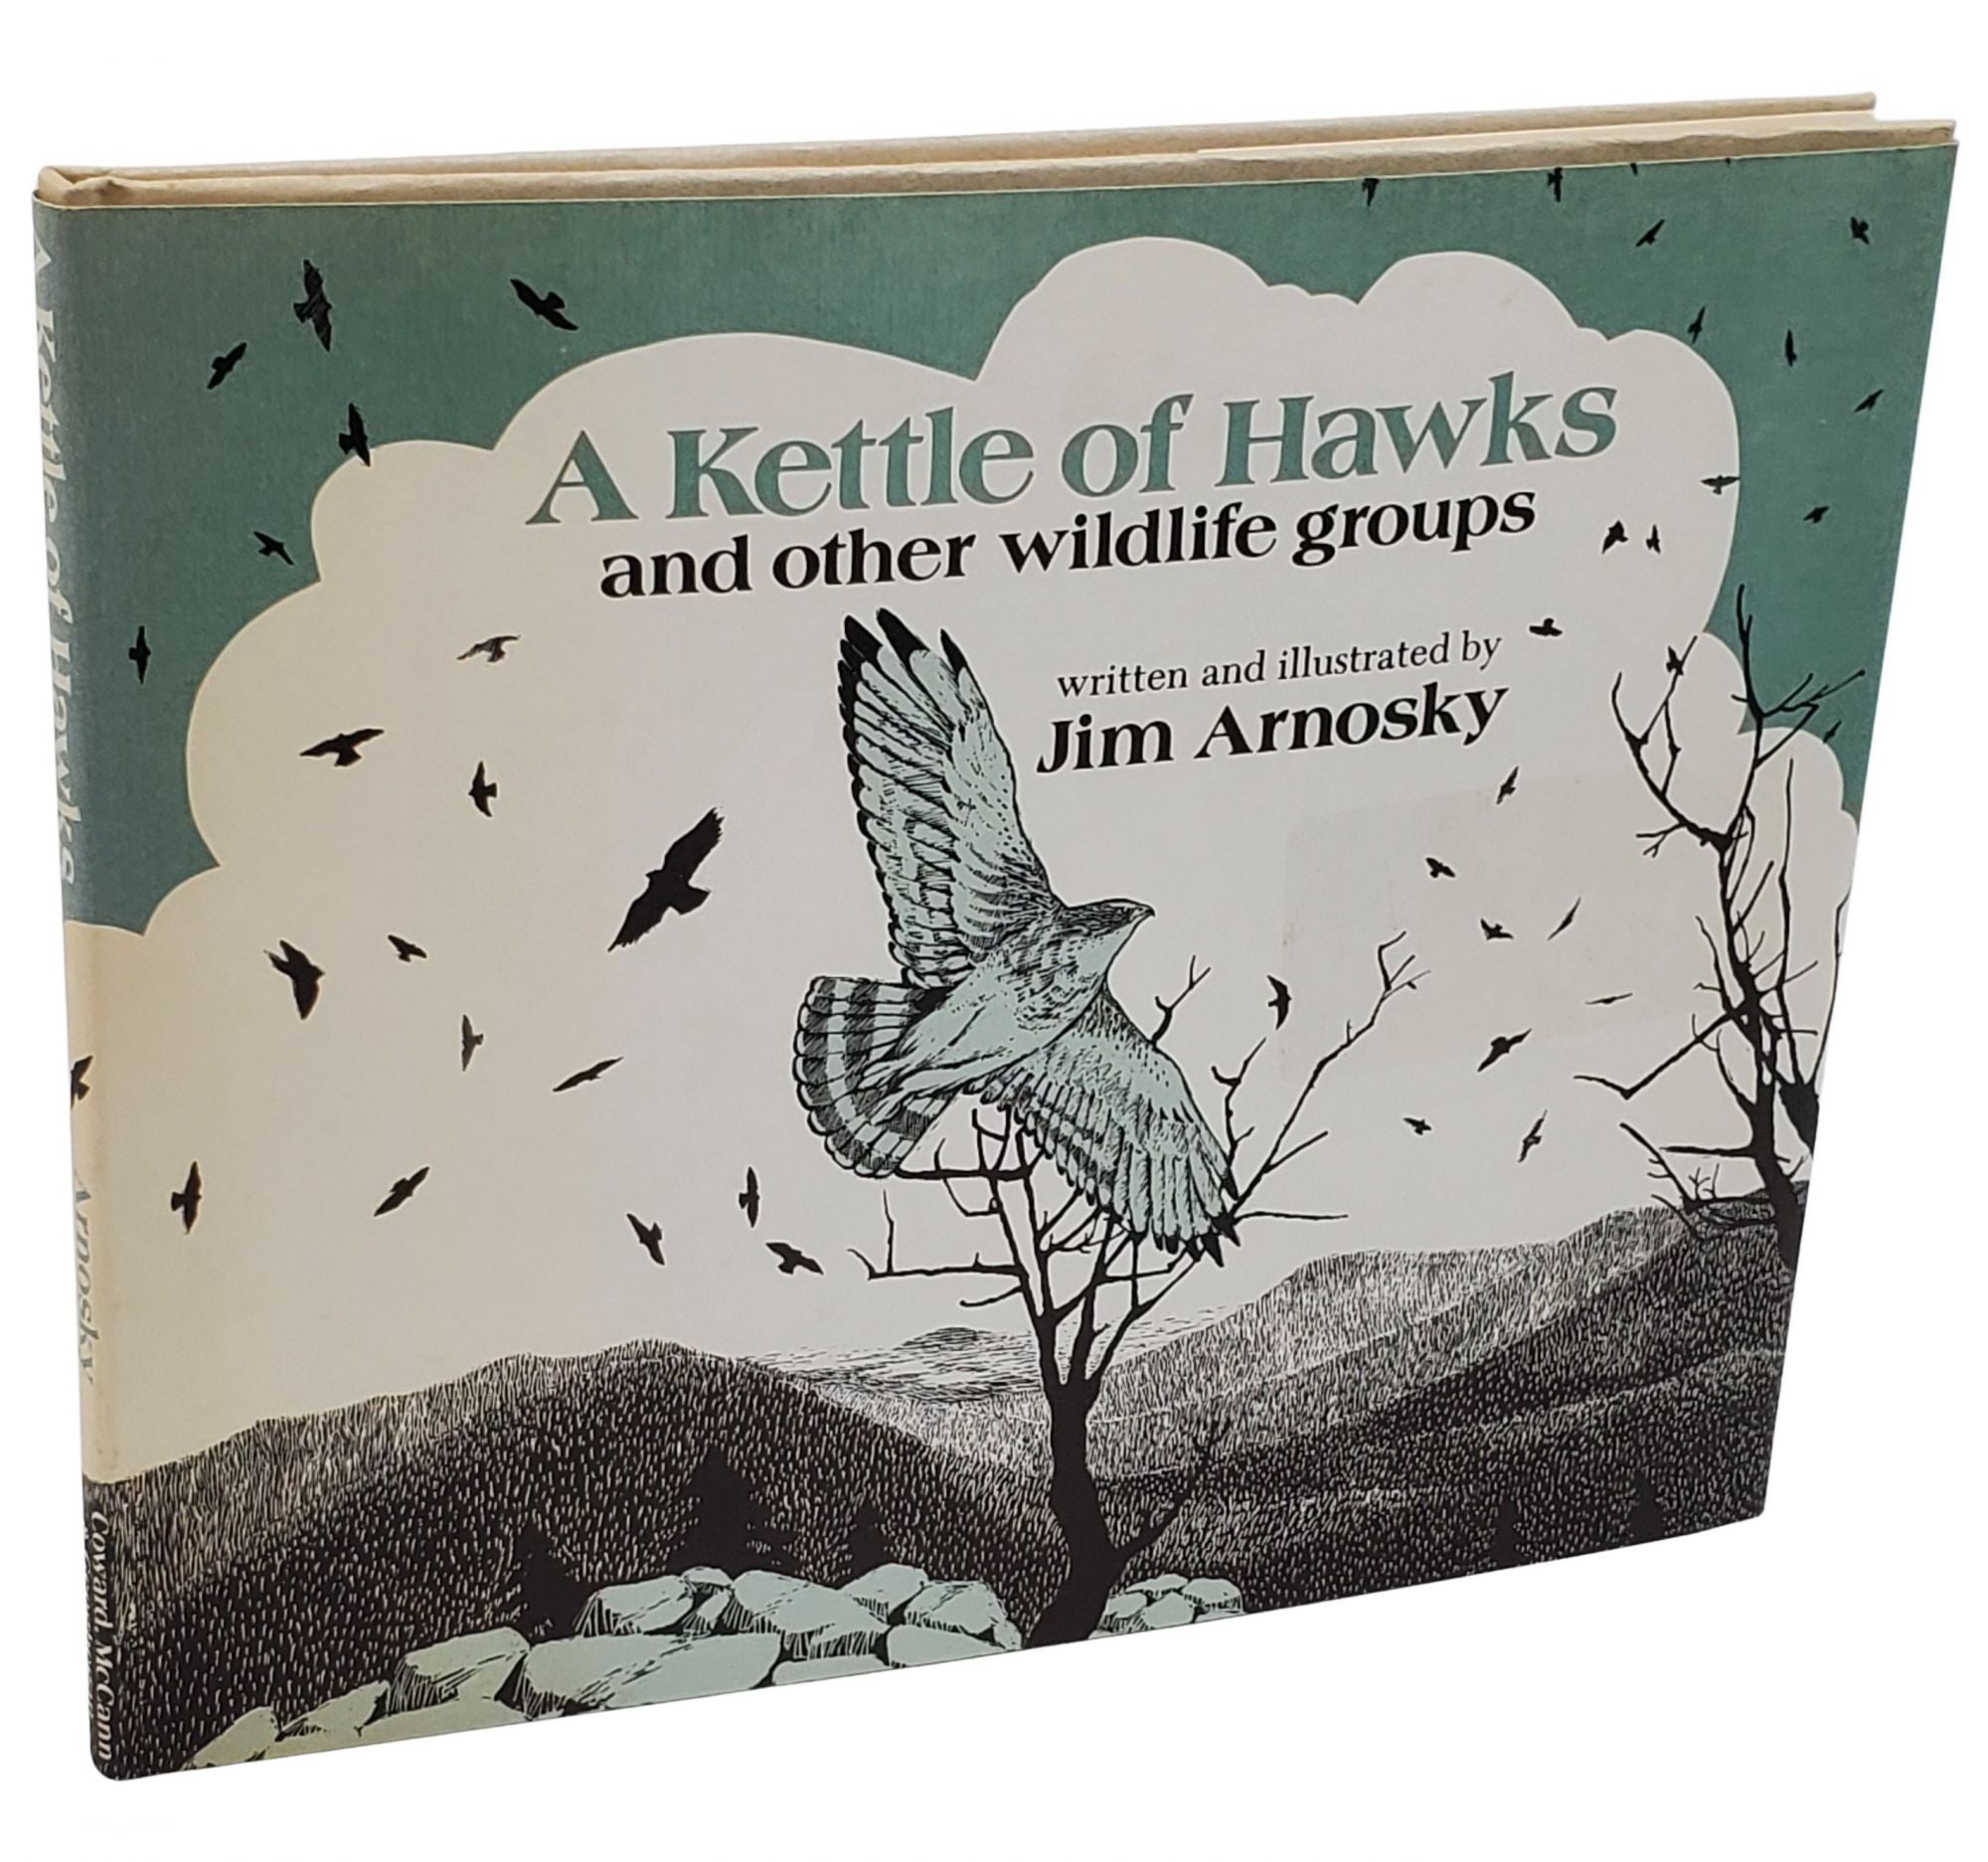 [Book #29702] A KETTLE OF HAWKS AND OTHER WILDLIFE GROUPS. Jim Arnosky.